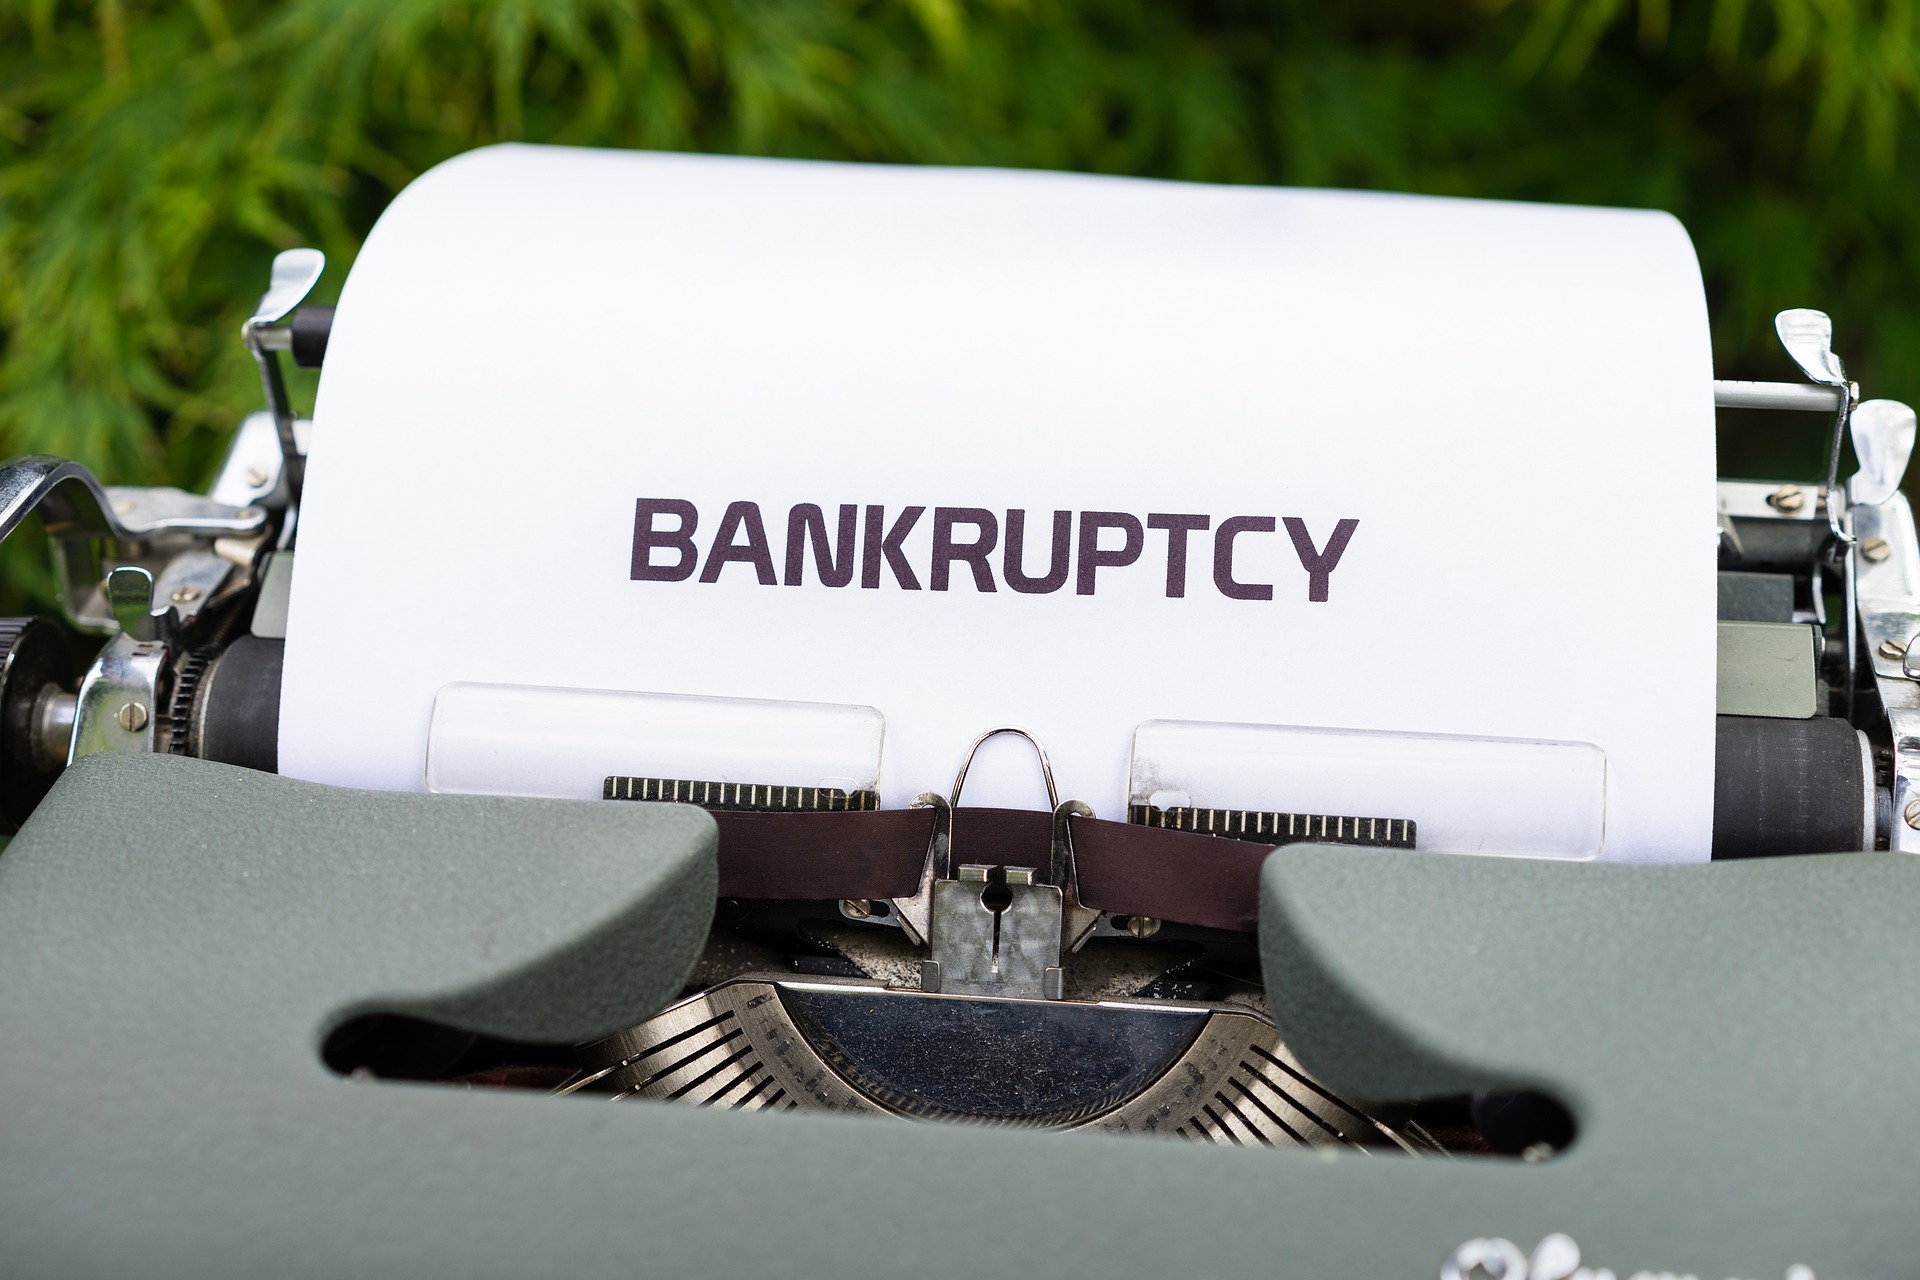 Corporate bankruptcy, insolvency cases may swell. Is govt ready to tackle them?